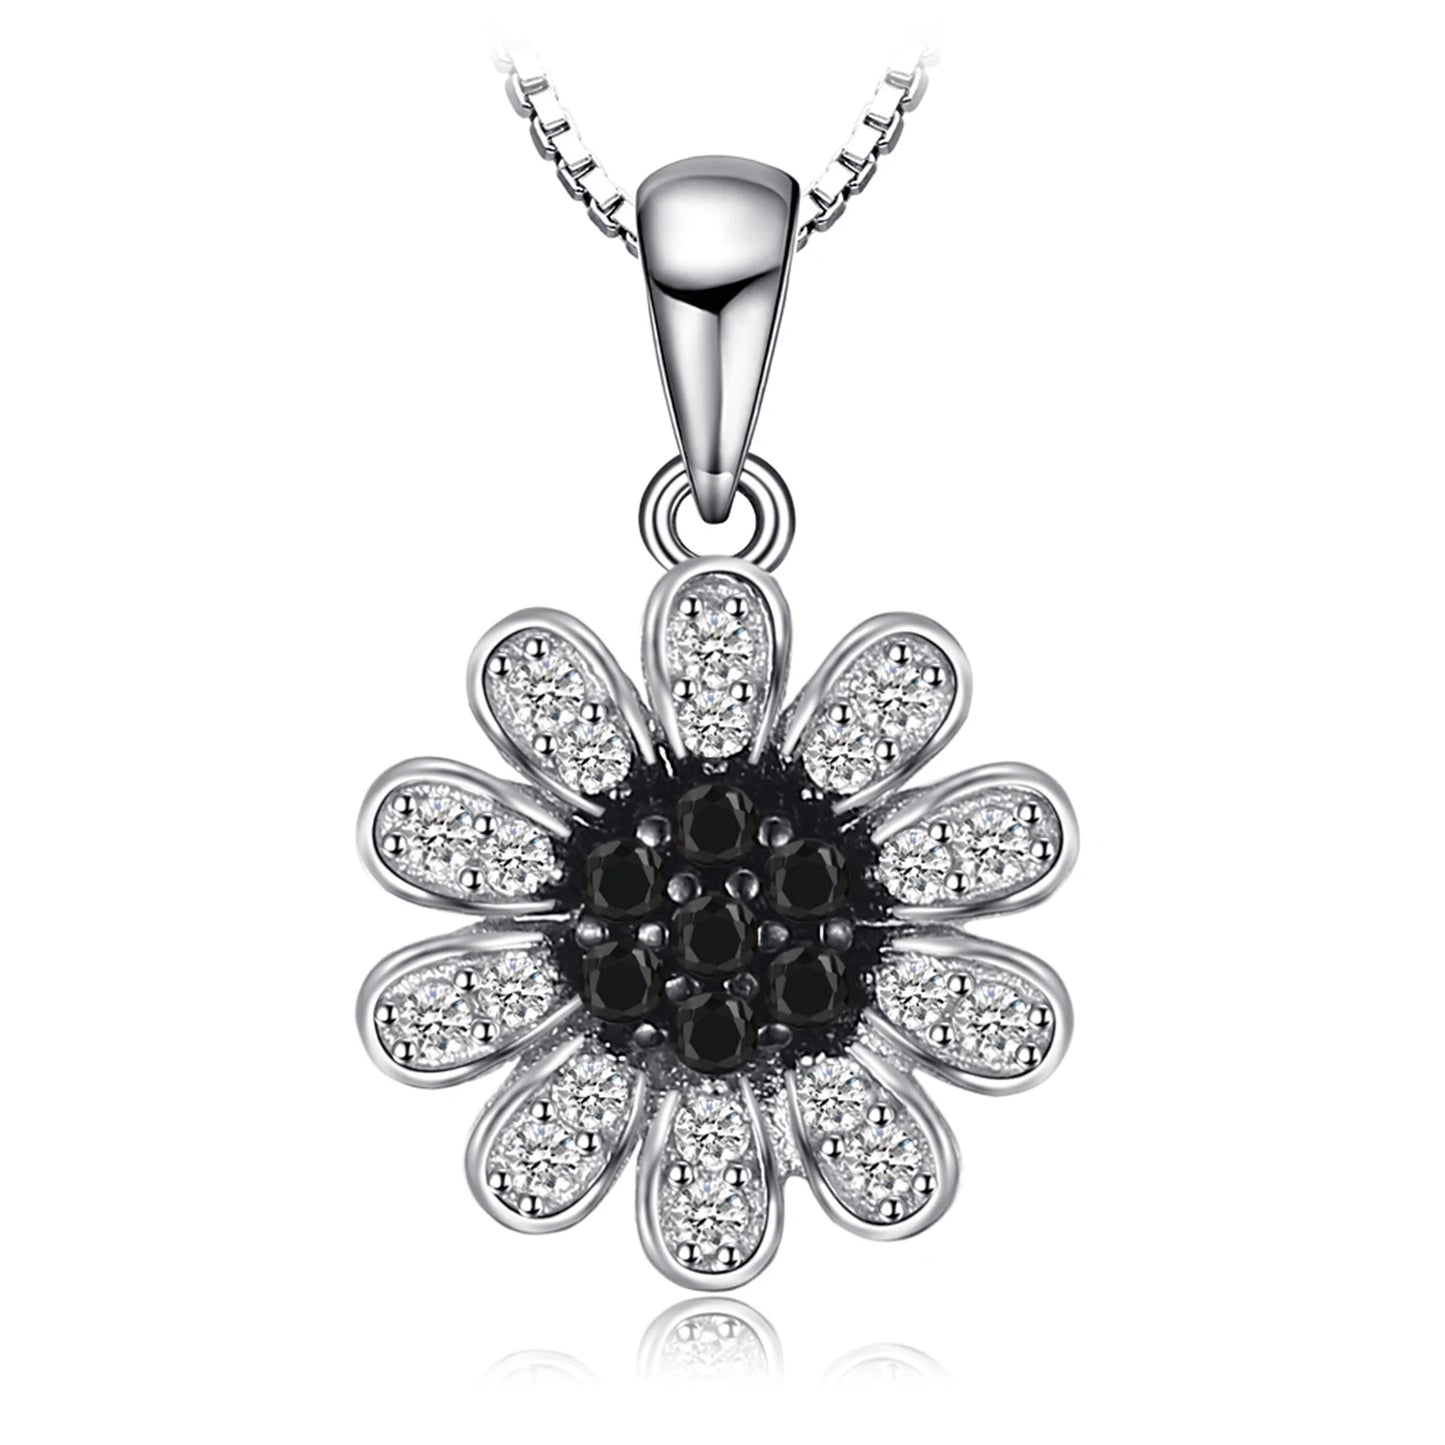 JewelryPalace Natural Black Spinel 925 Sterling Silver Pendant Necklace for Woman Fashion Jewelry No Chain AP224175